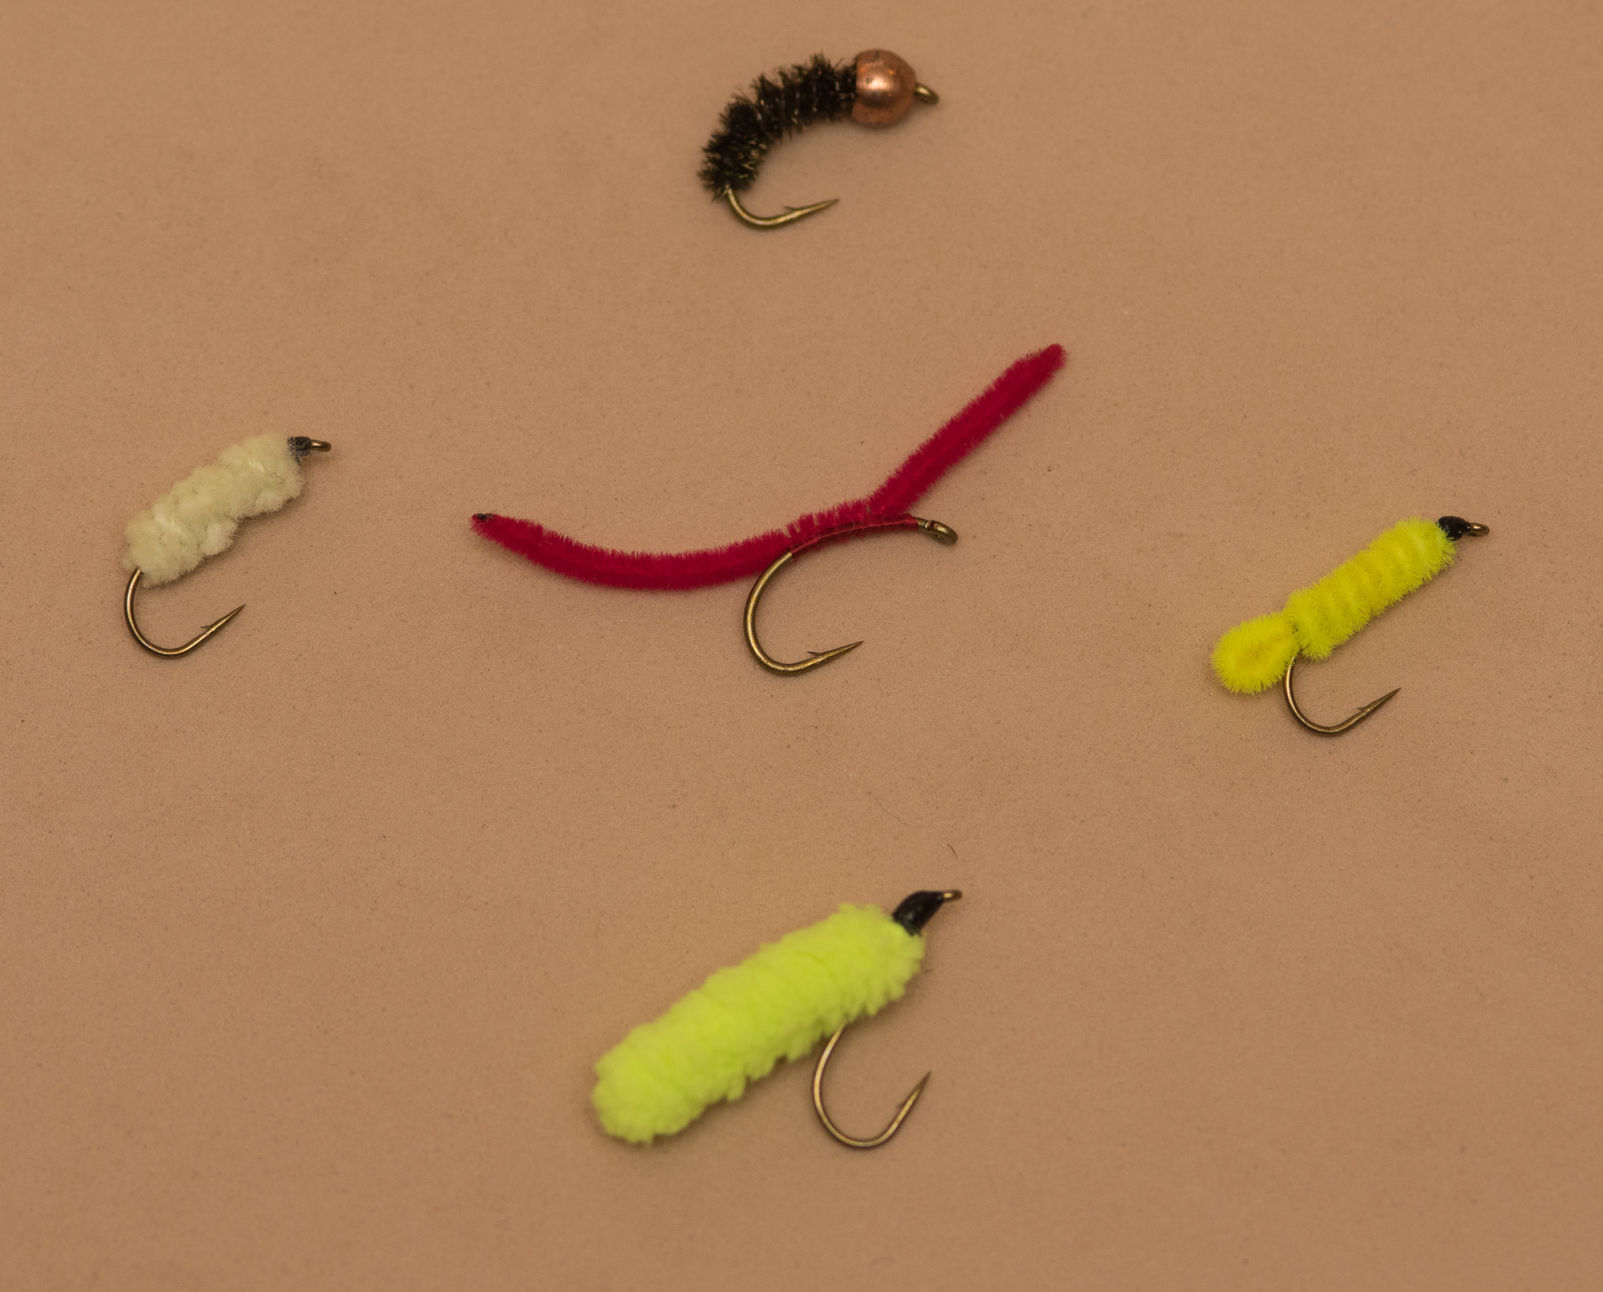 SIZE 11 Jelly Worms Fly Fishing Wet Deadly Under Indicator Trout Flies 